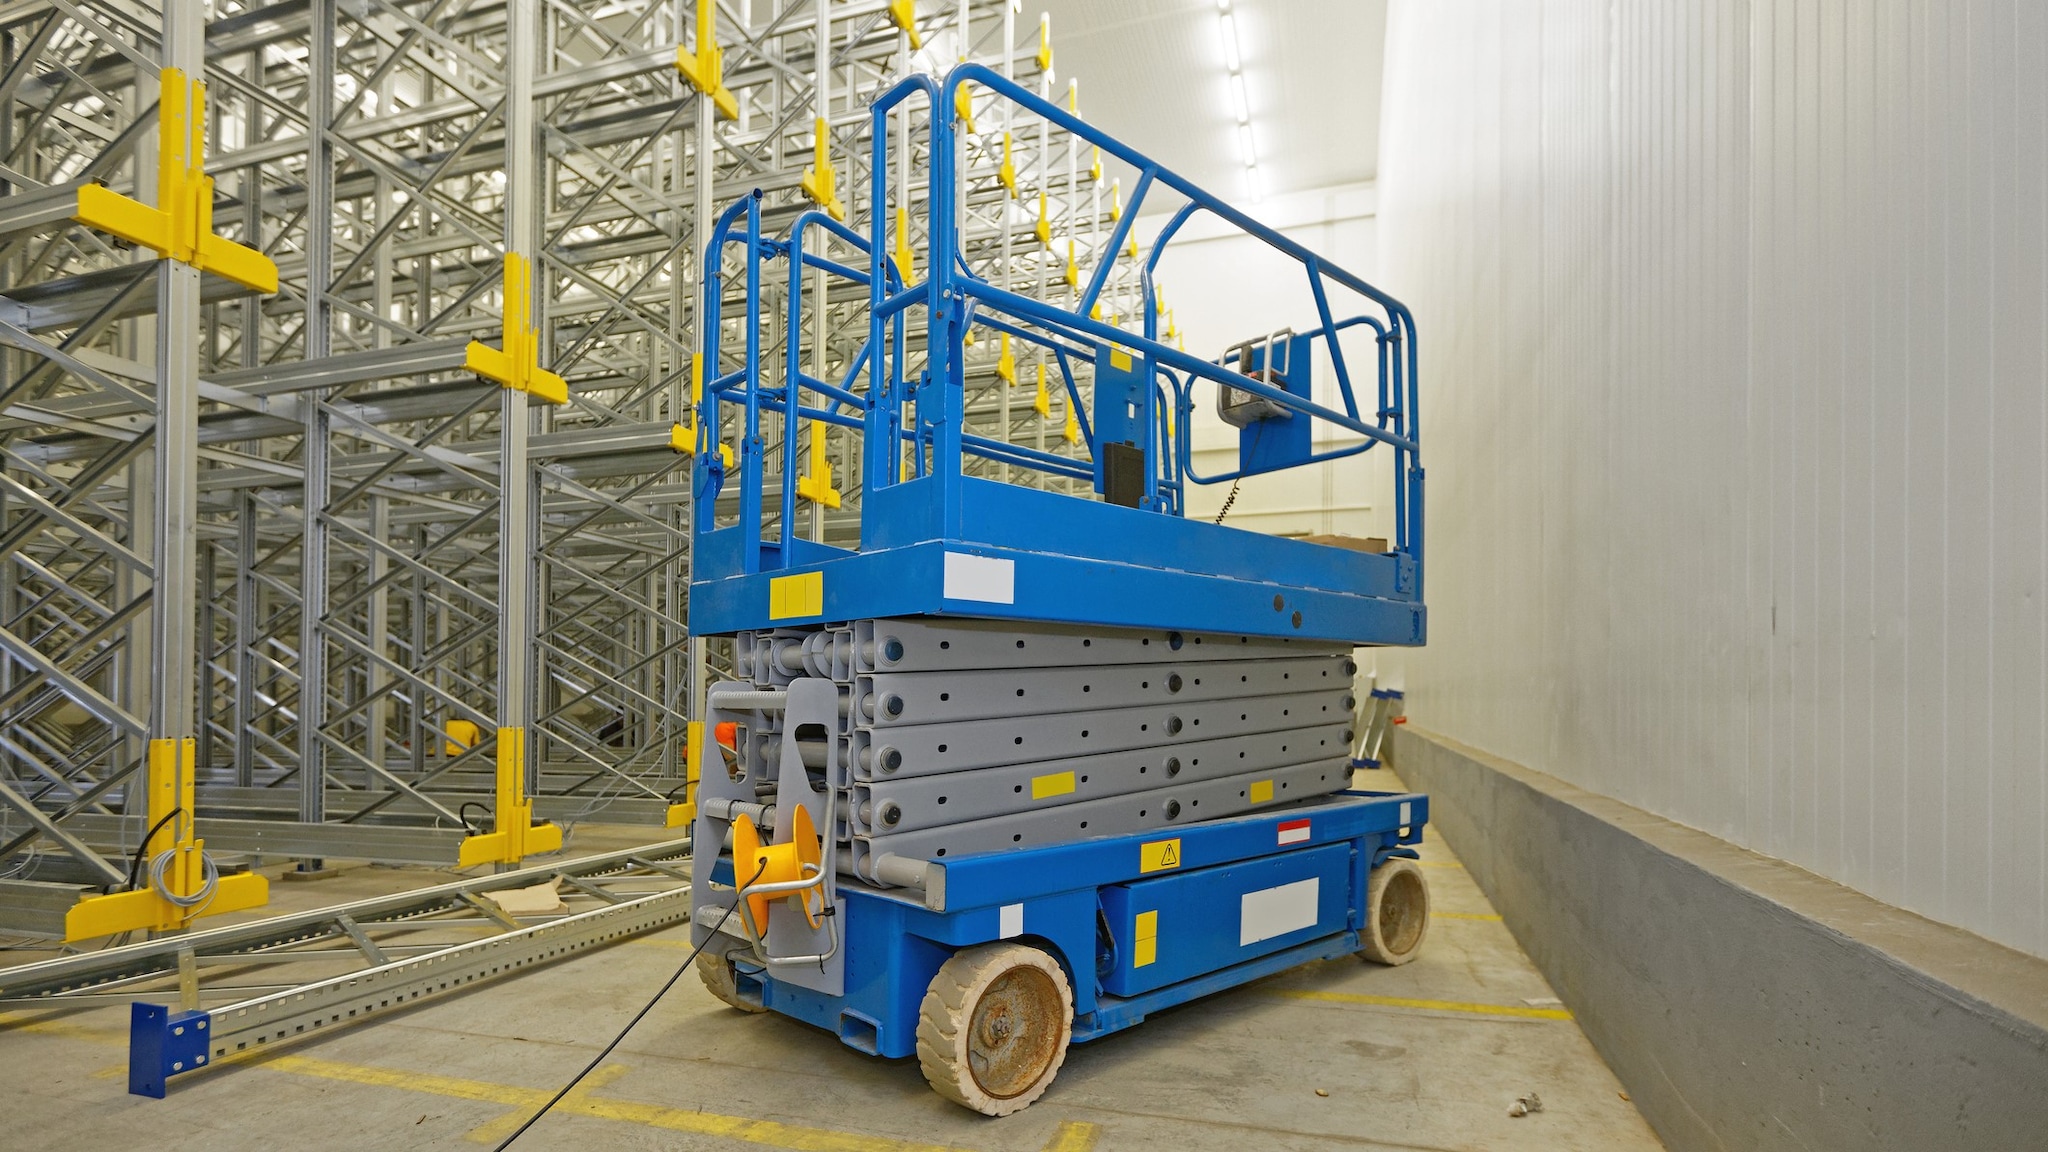 A blue aerial lift is in a warehouse. Photo by Marco Berik/Getty Images